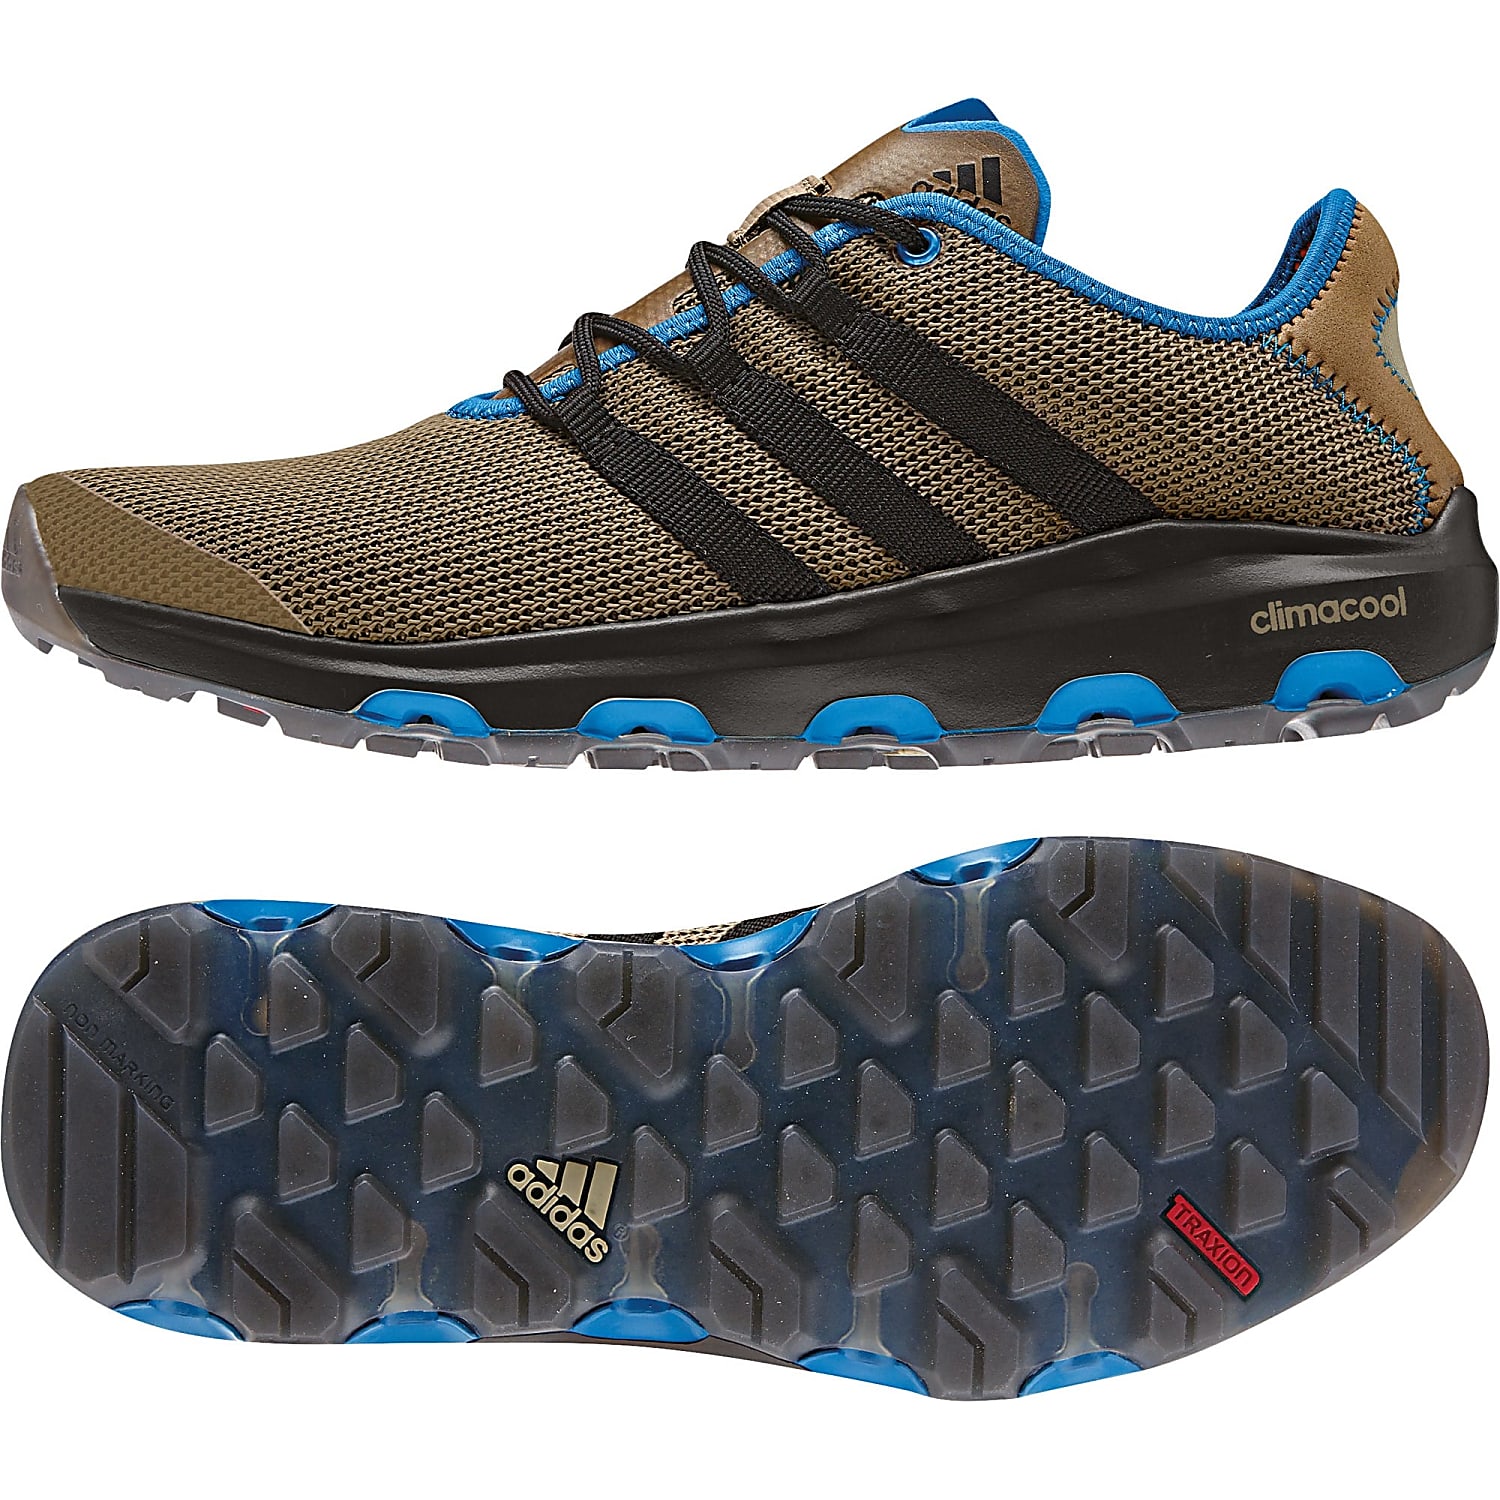 adidas climacool 5 running shoes europe